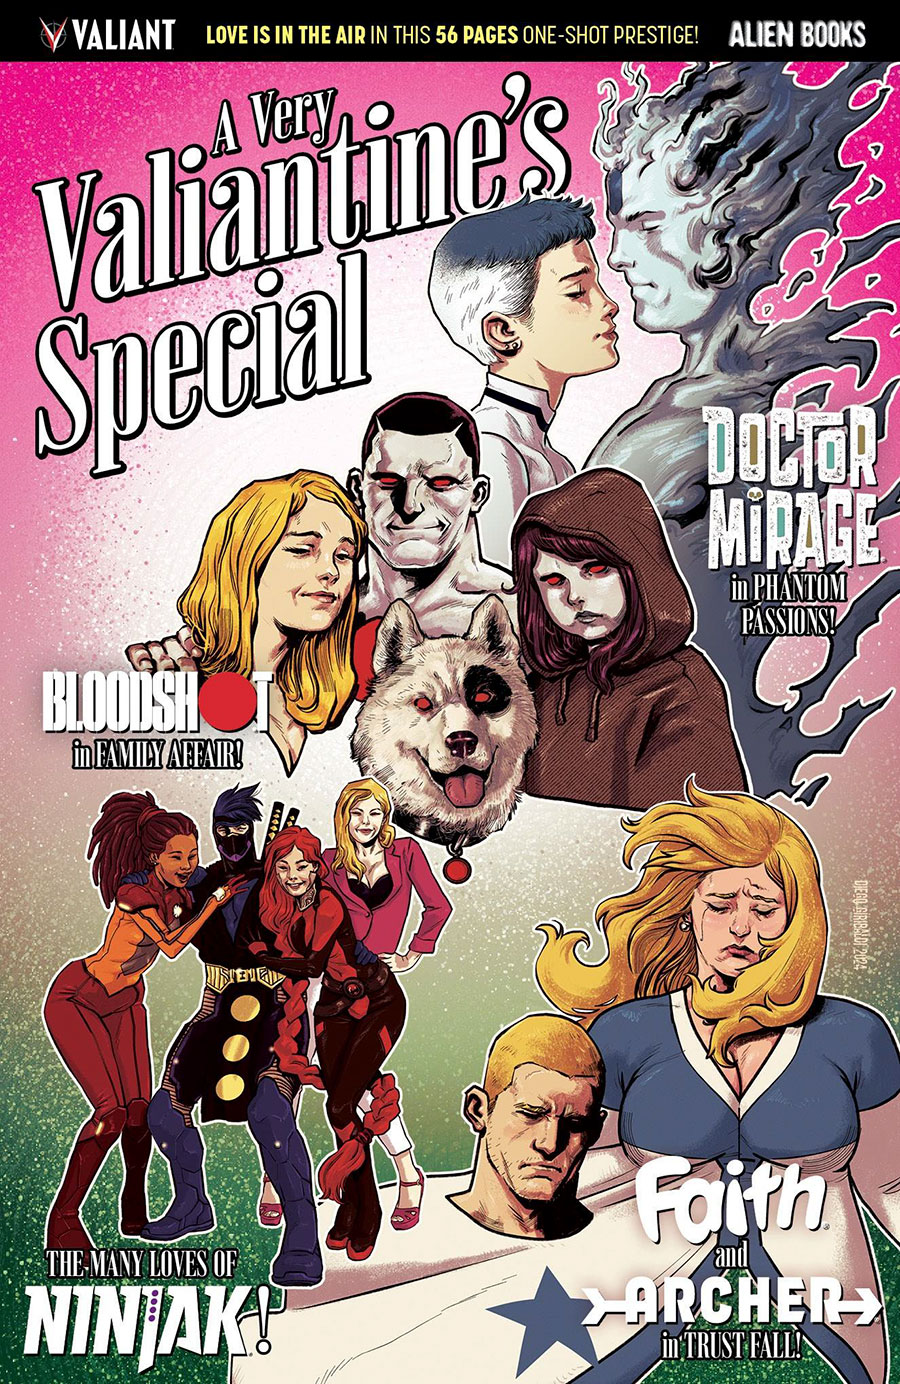 A Very Valiantines Special #1 (One Shot)